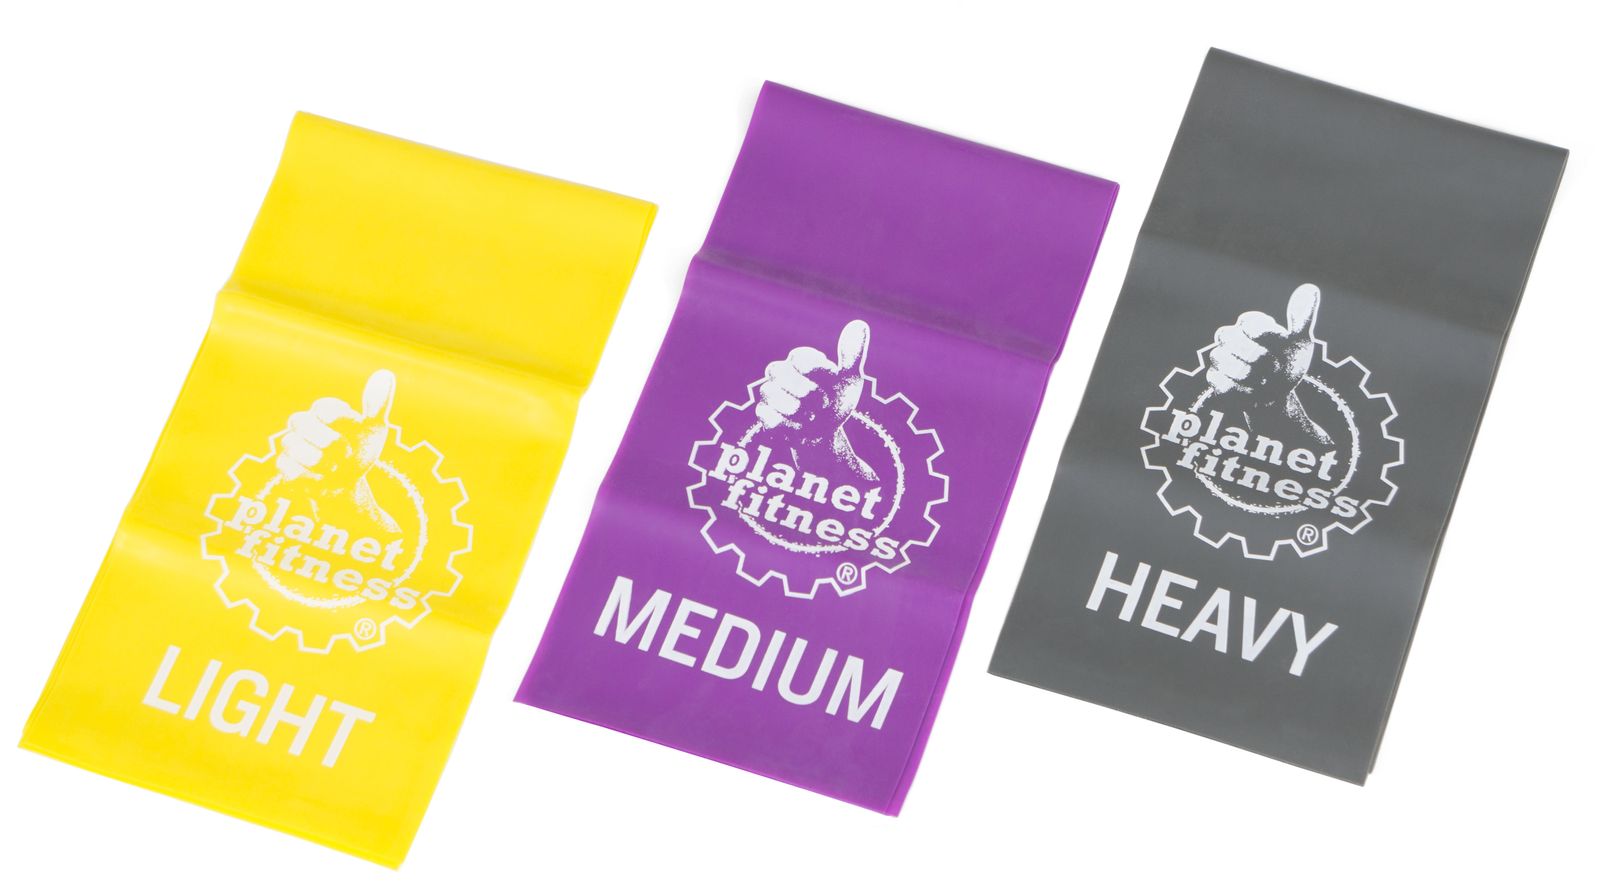 RDY 送料無料 Planet Fitness カスタマイズ可能で便利なエクササイズバンド 楽天海外通販 Planet Fitness Exercise Bands for Customizable and Convenient Workouts